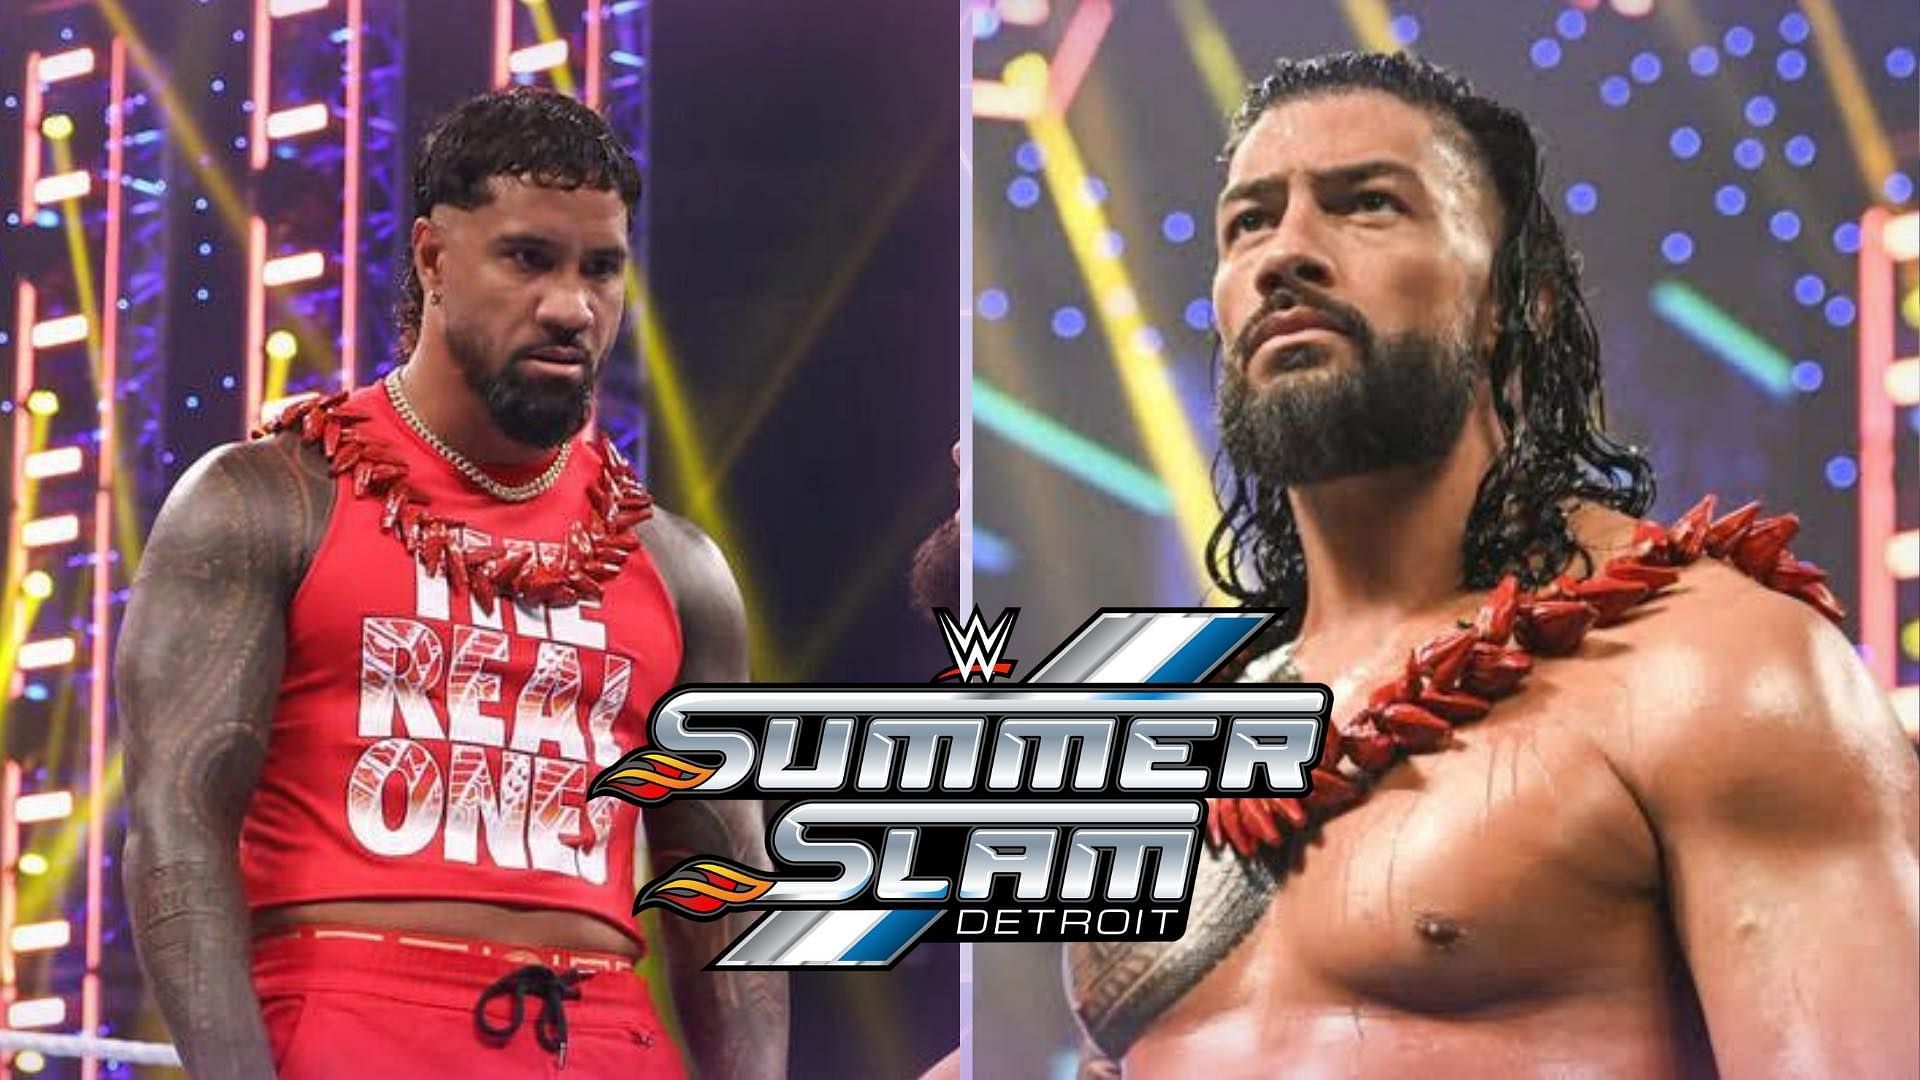 Jey Uso and Roman Reigns will clash at WWE SummerSlam